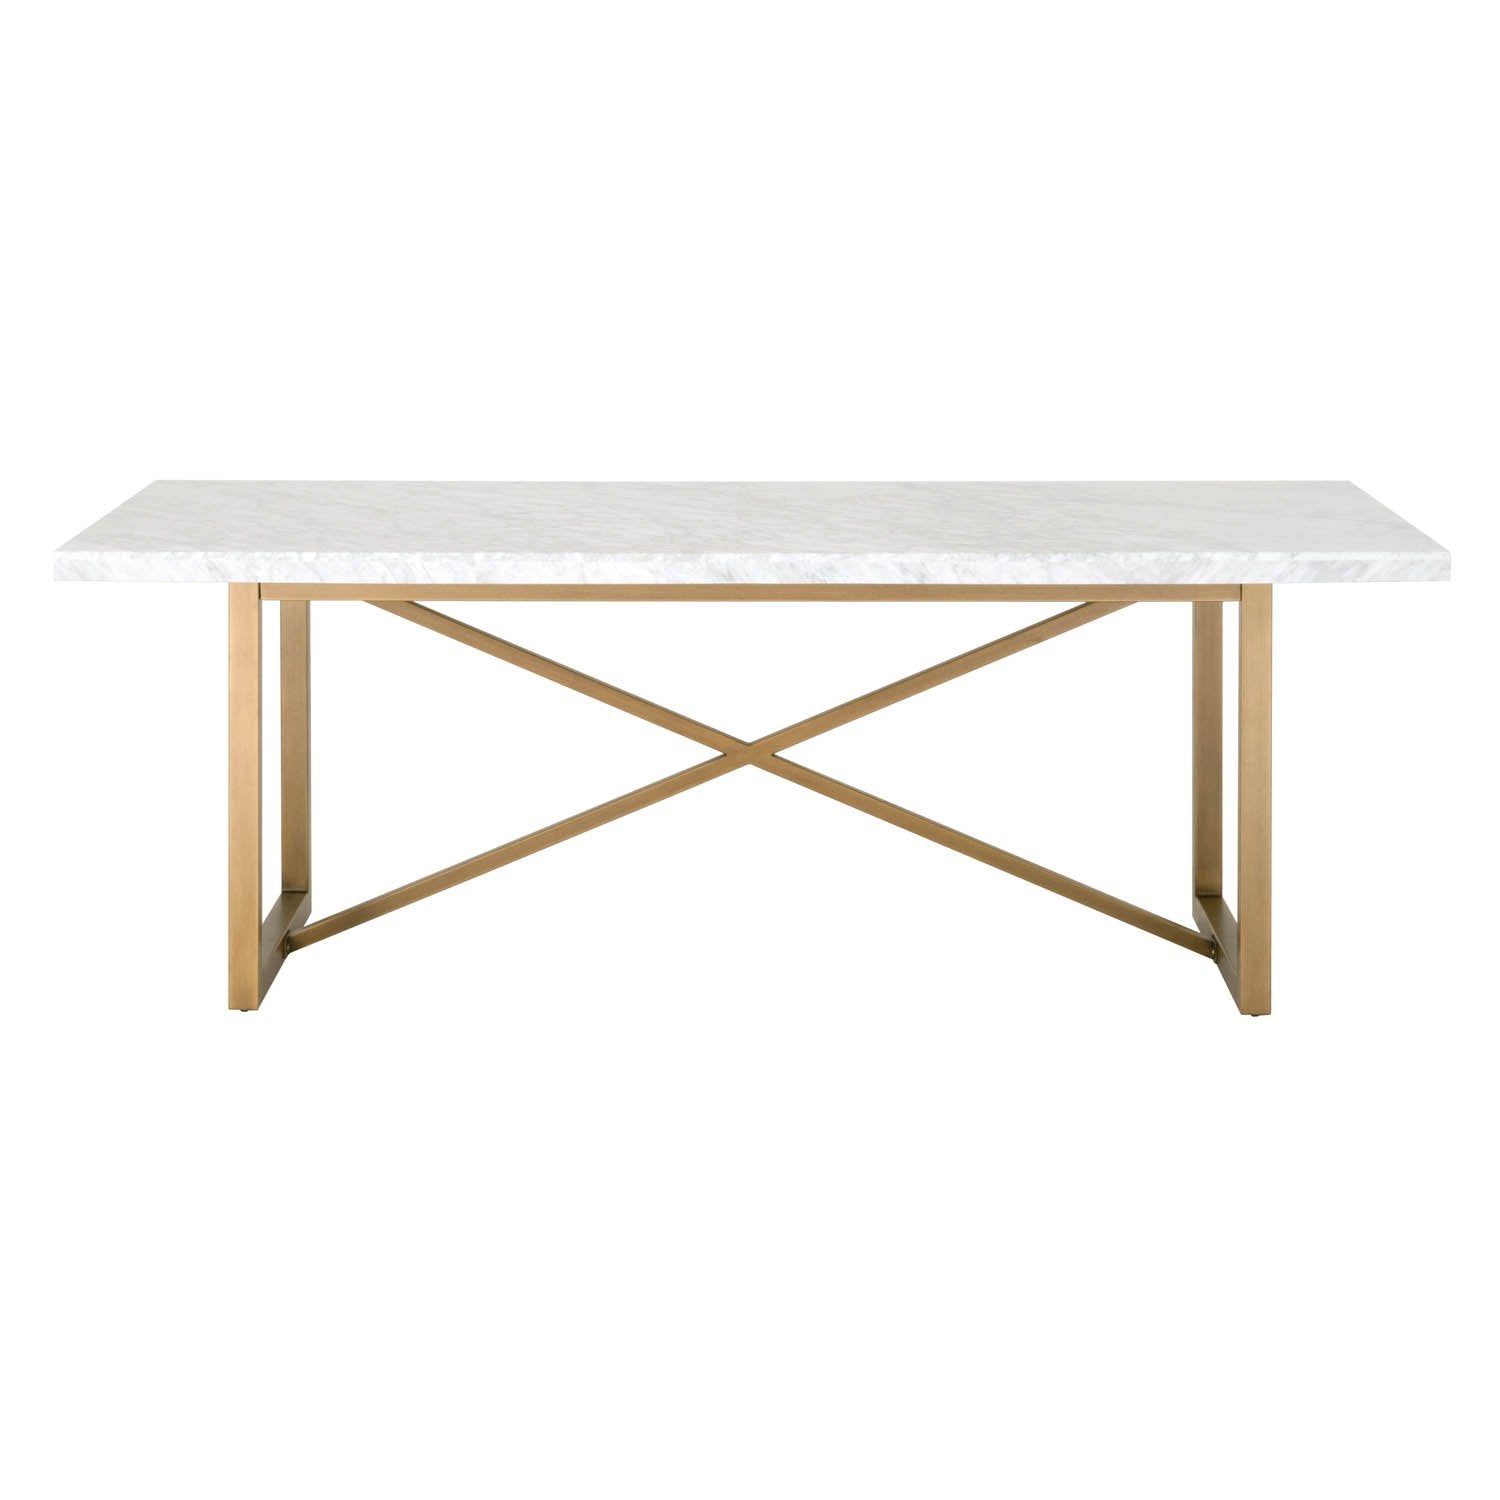 Carrera Dining Table in White Carrera Marble